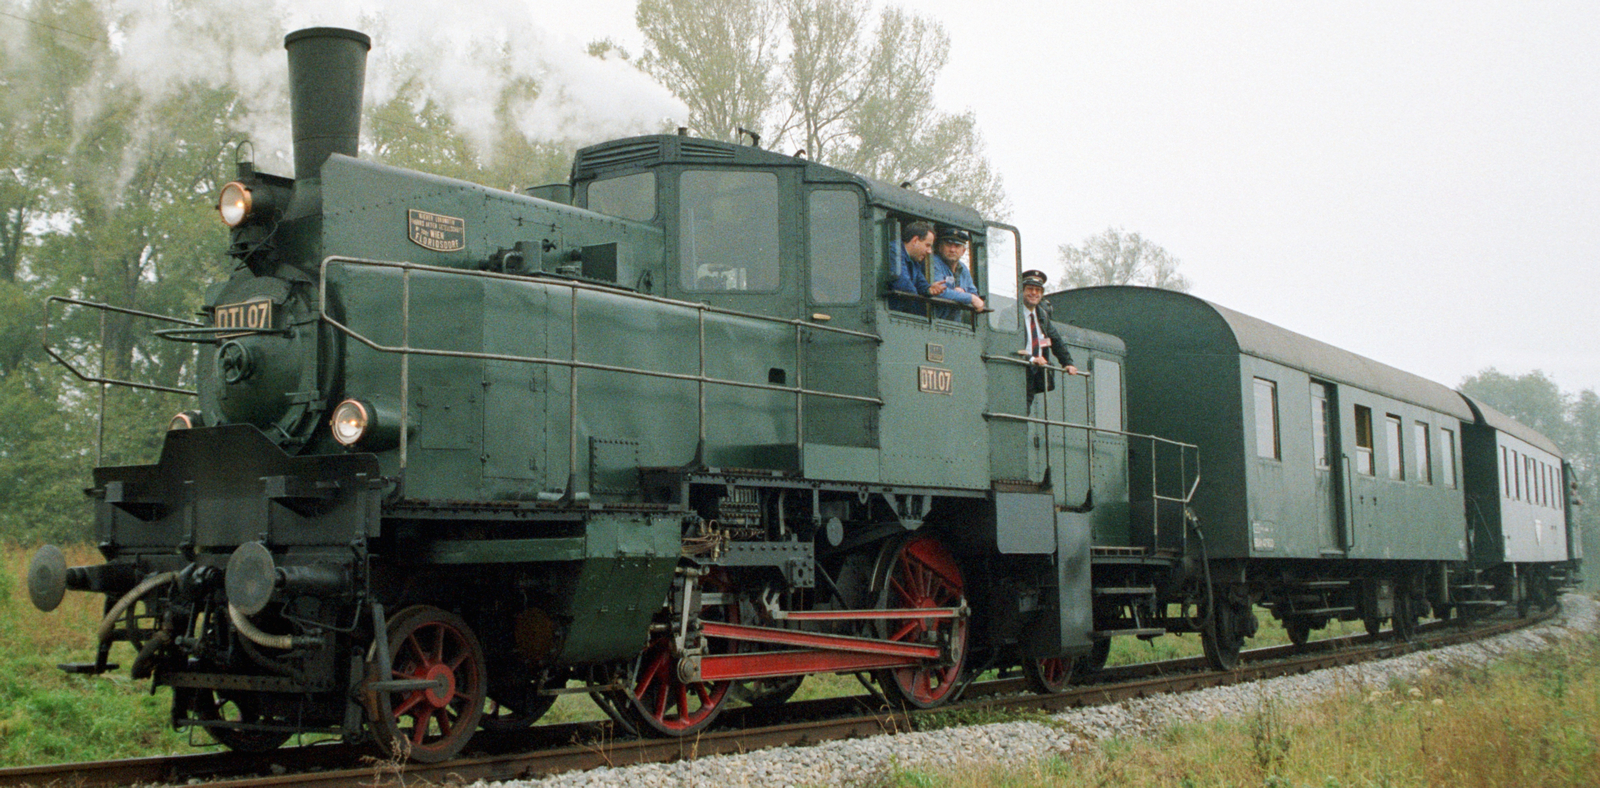 DT 1.07 in October 1993 in Orth an der Donau